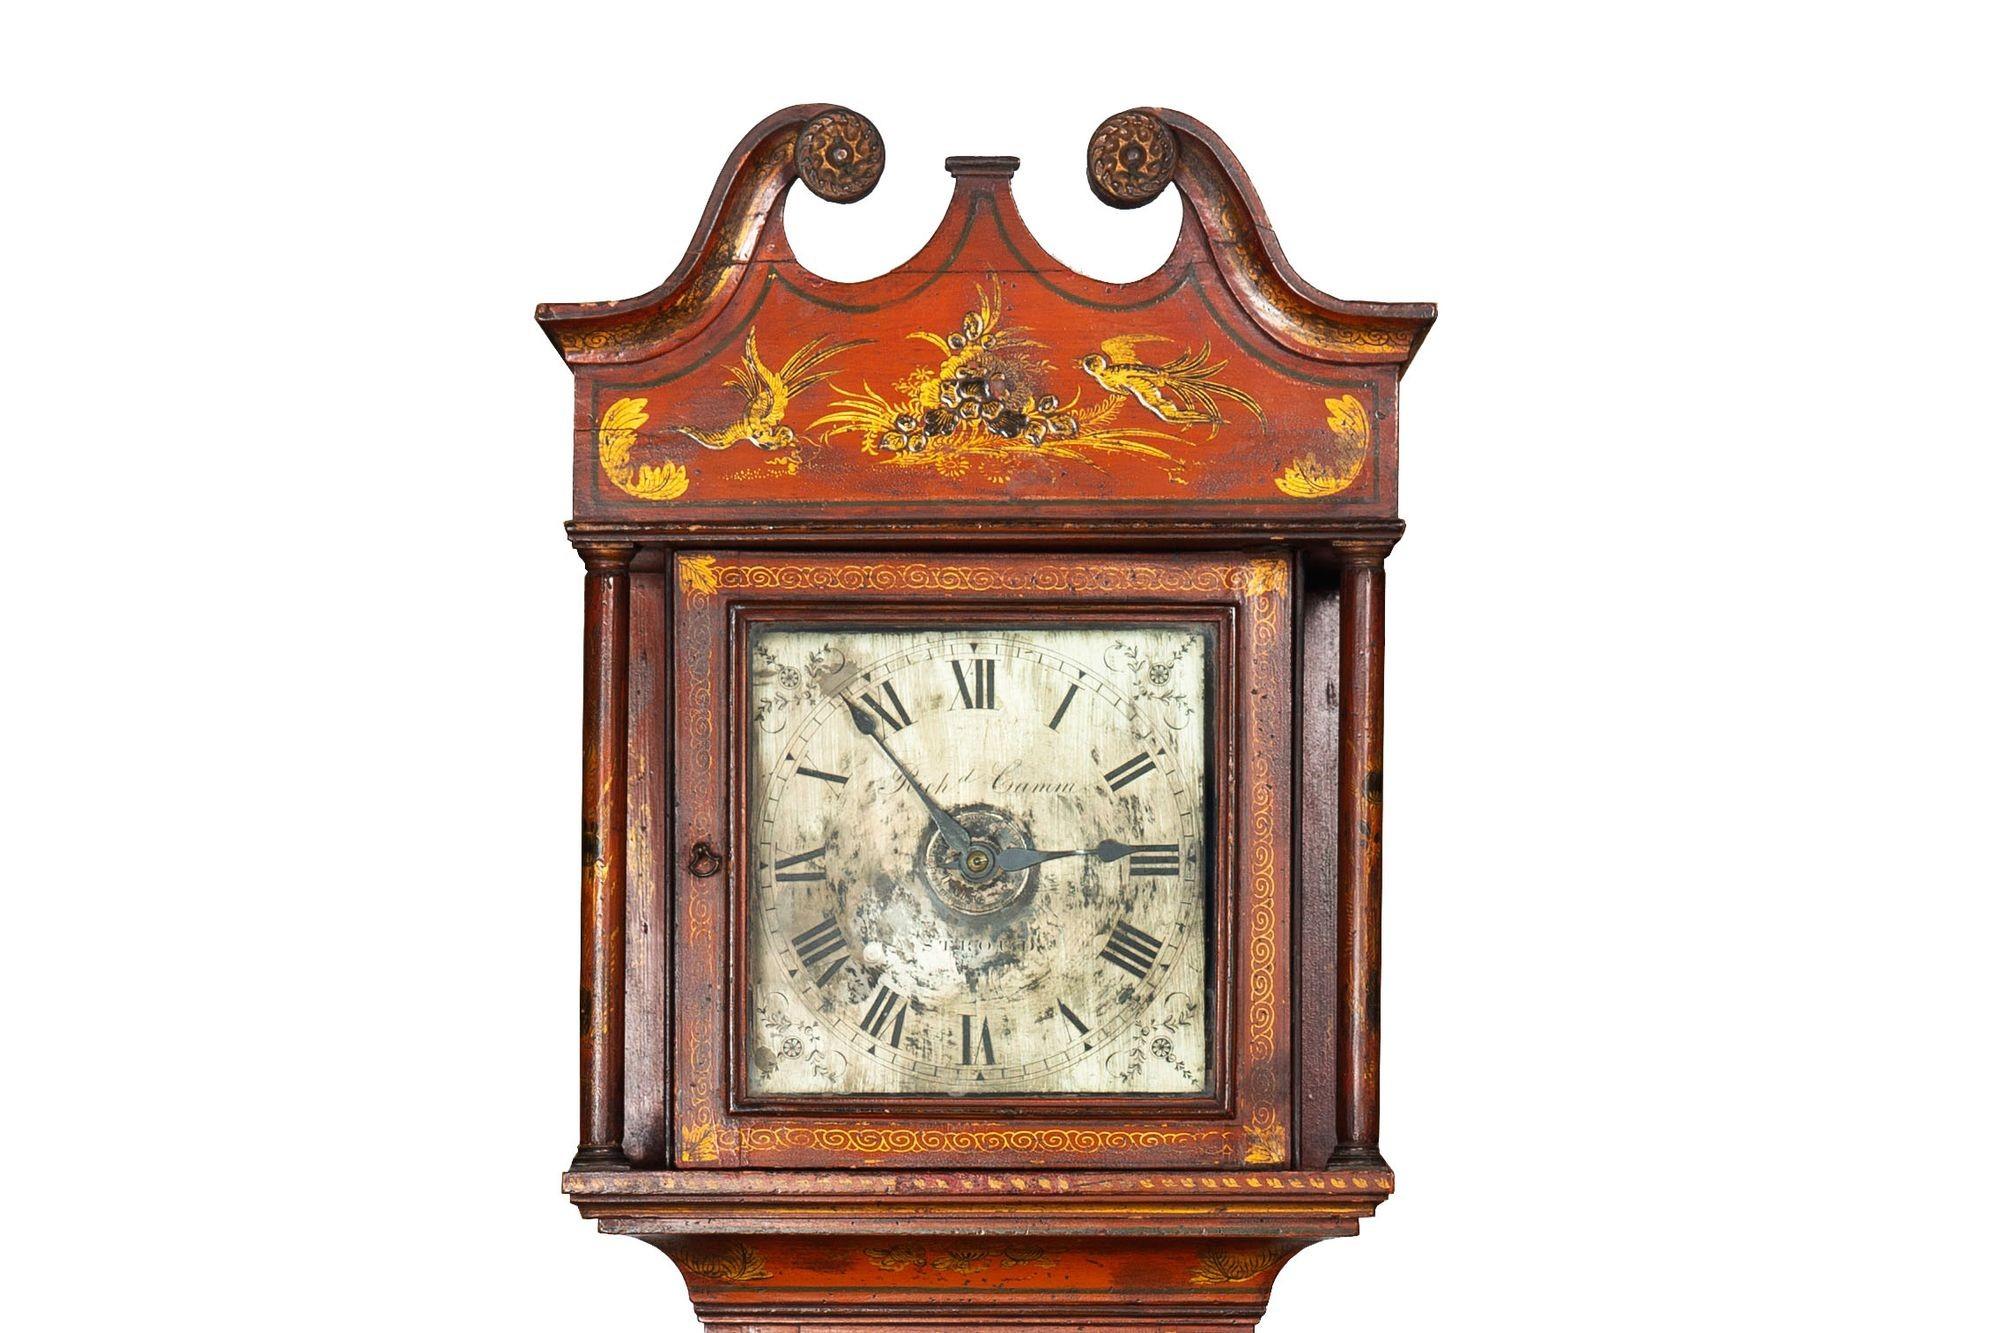 English Antique Red Chinoiserie Six-Bell Hanging Wall Clock ca. 1830 In Good Condition For Sale In Shippensburg, PA